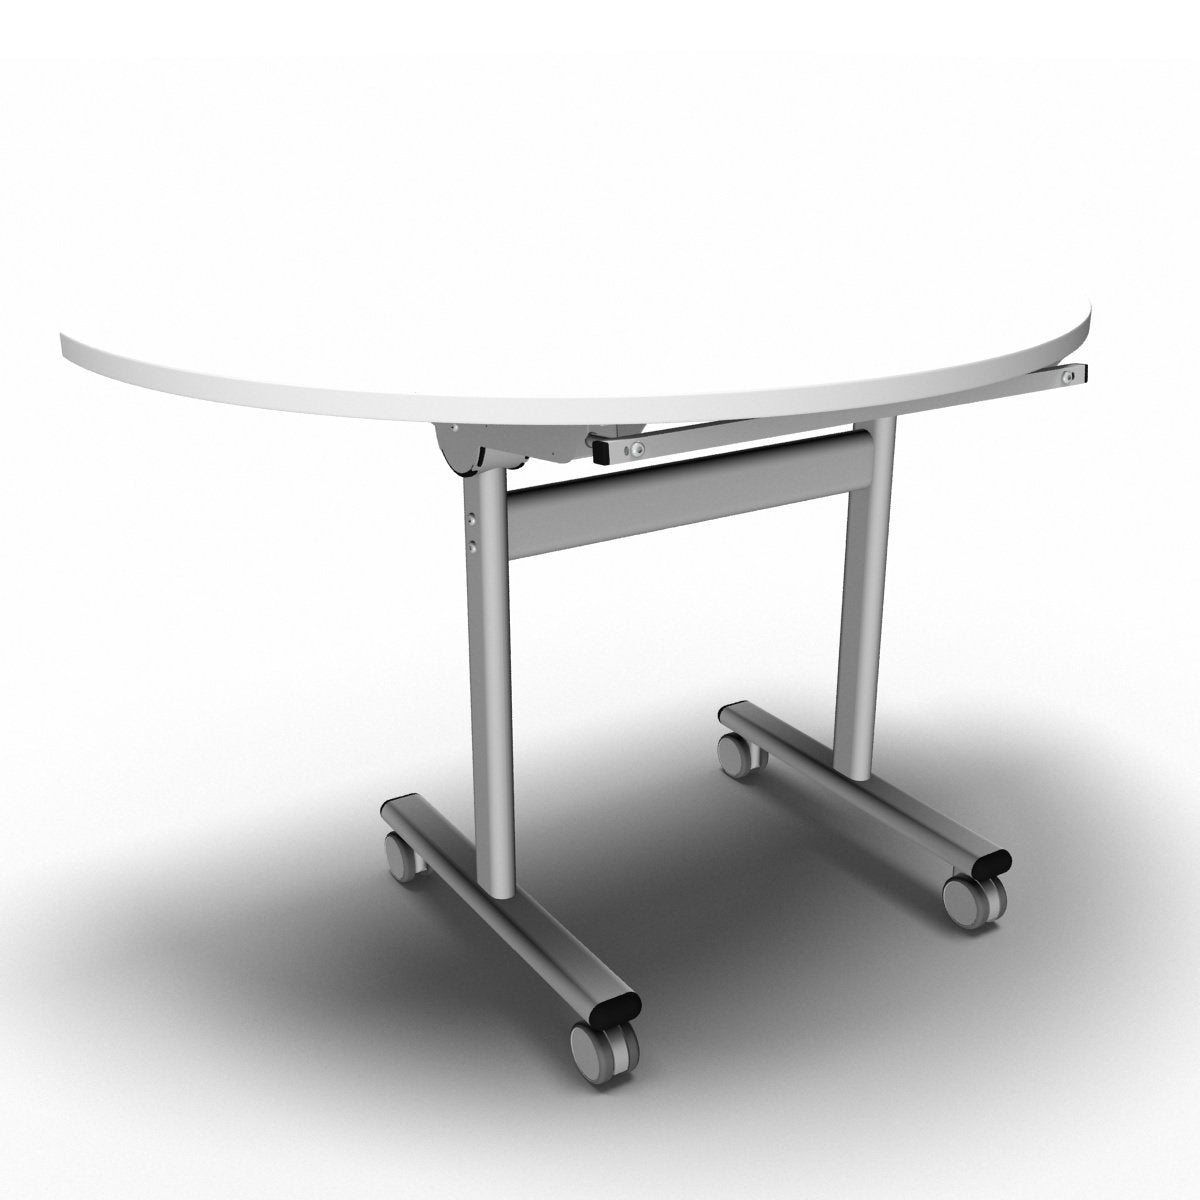 Table 1200 x 600 x 720mm / Semi Circular / White Synergy Flip Top Tables